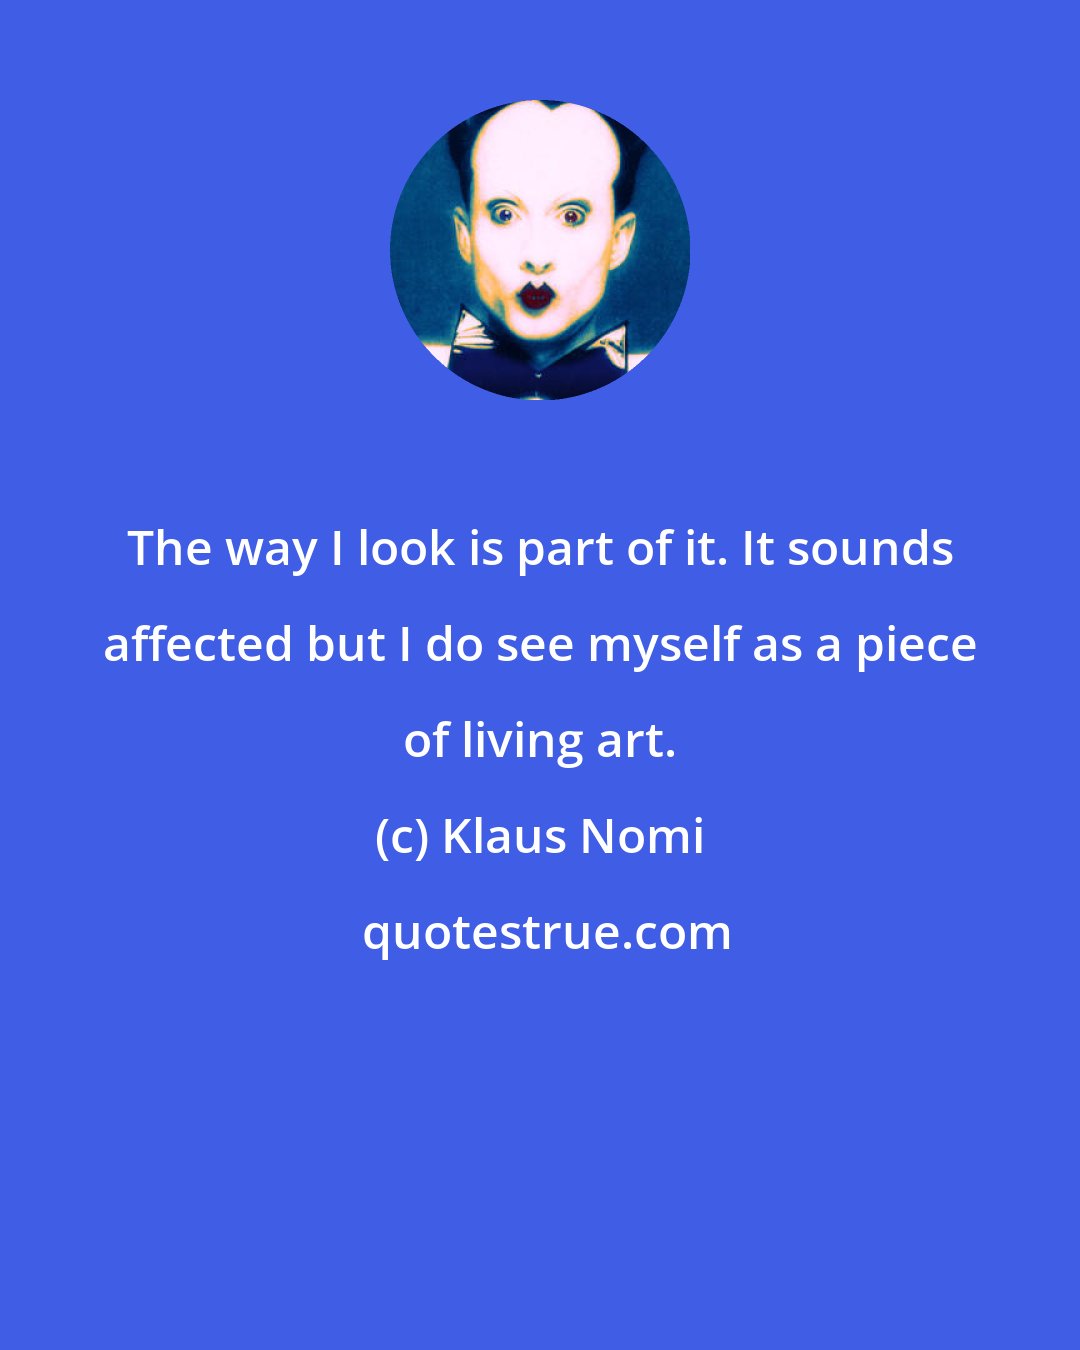 Klaus Nomi: The way I look is part of it. It sounds affected but I do see myself as a piece of living art.